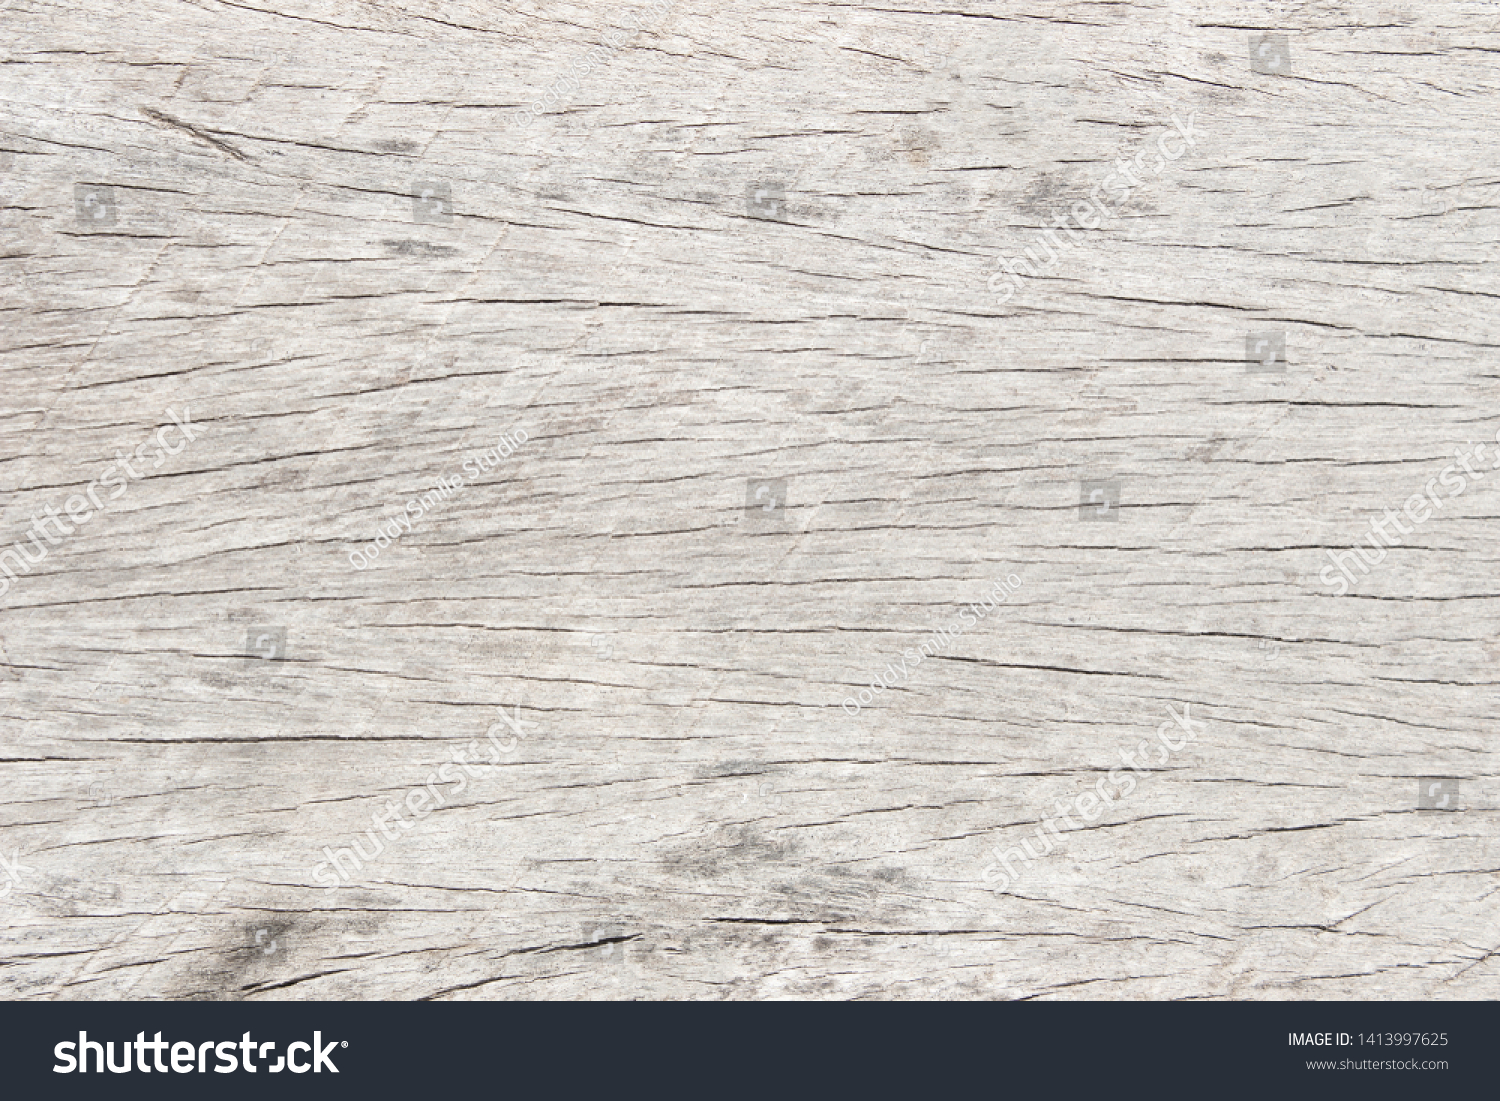 White wooden texture background. wood texture with natural pattern. Old wood wallpaper. #1413997625